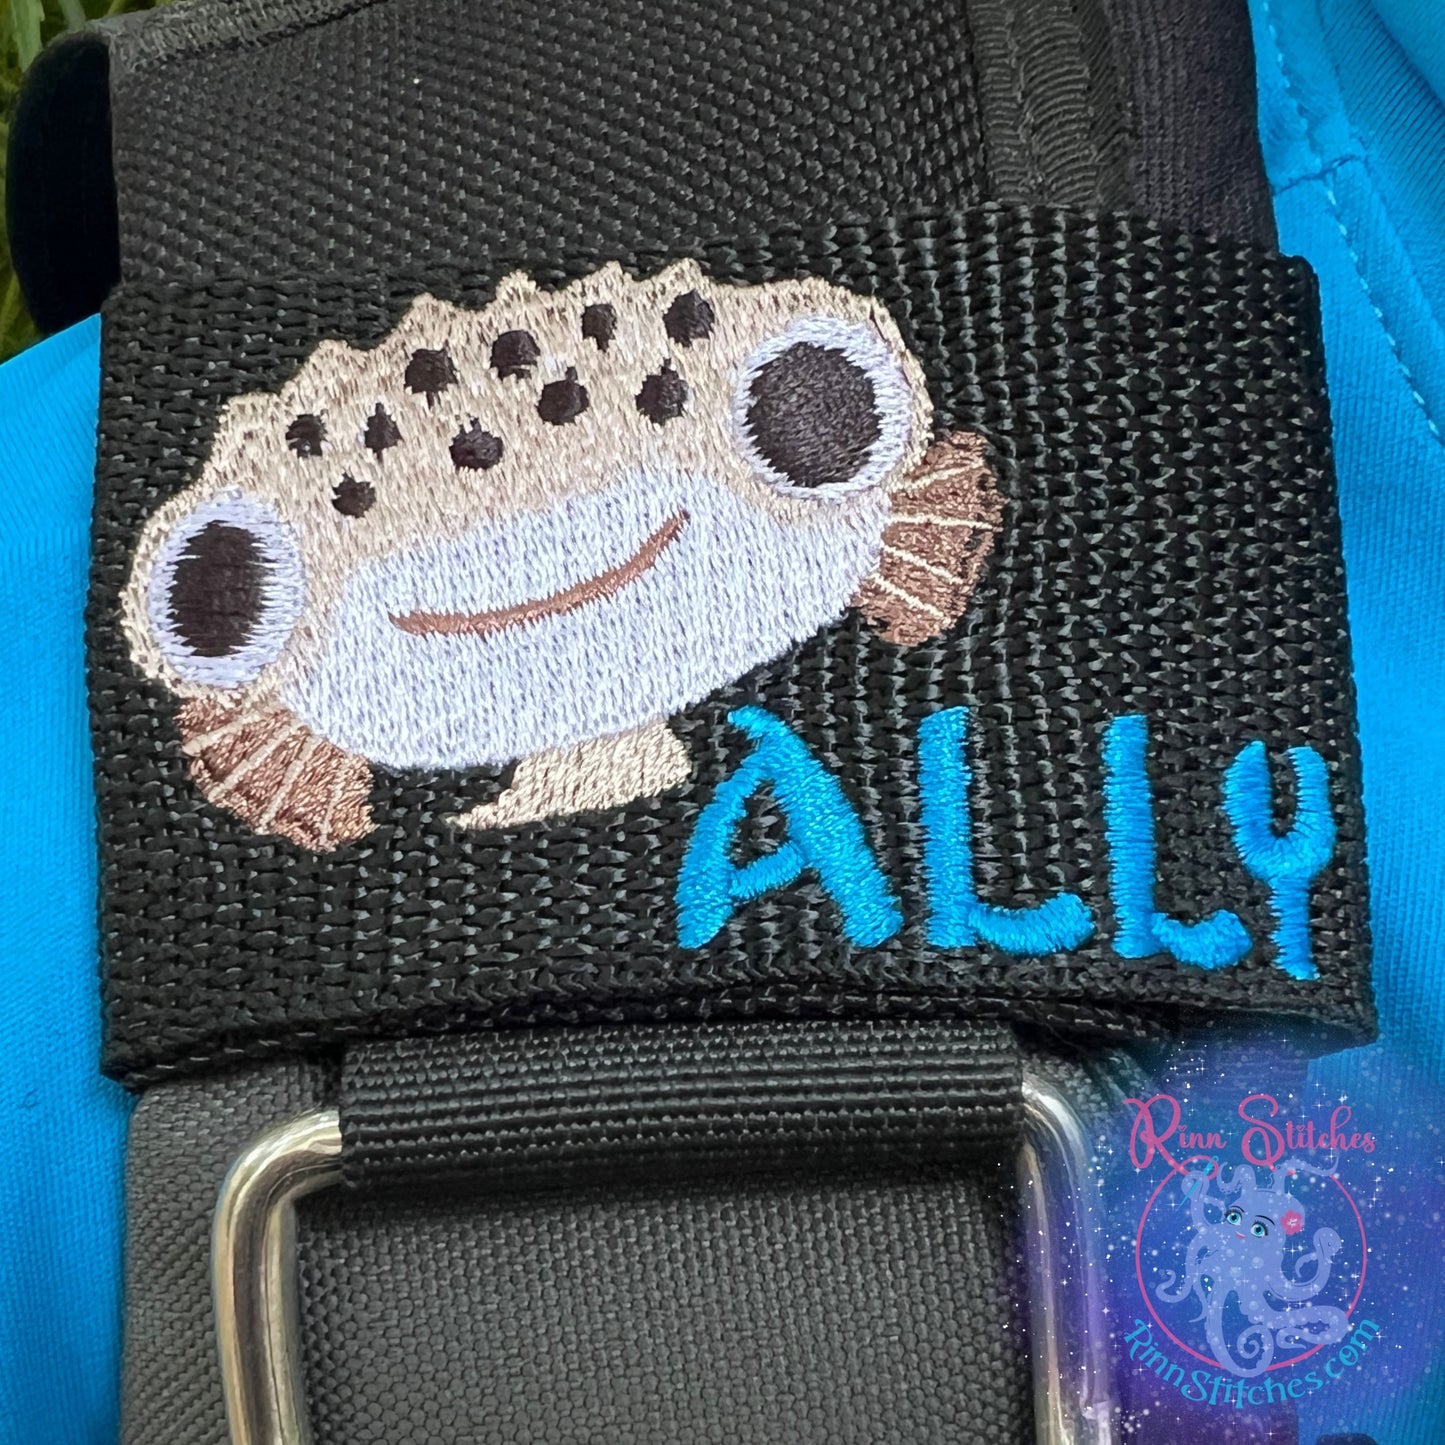 Cute Puffer Fish Face Personalized & Customizable Scuba Diver BCD Identification Tag By Rinn Stitches on Maui, Hawaii